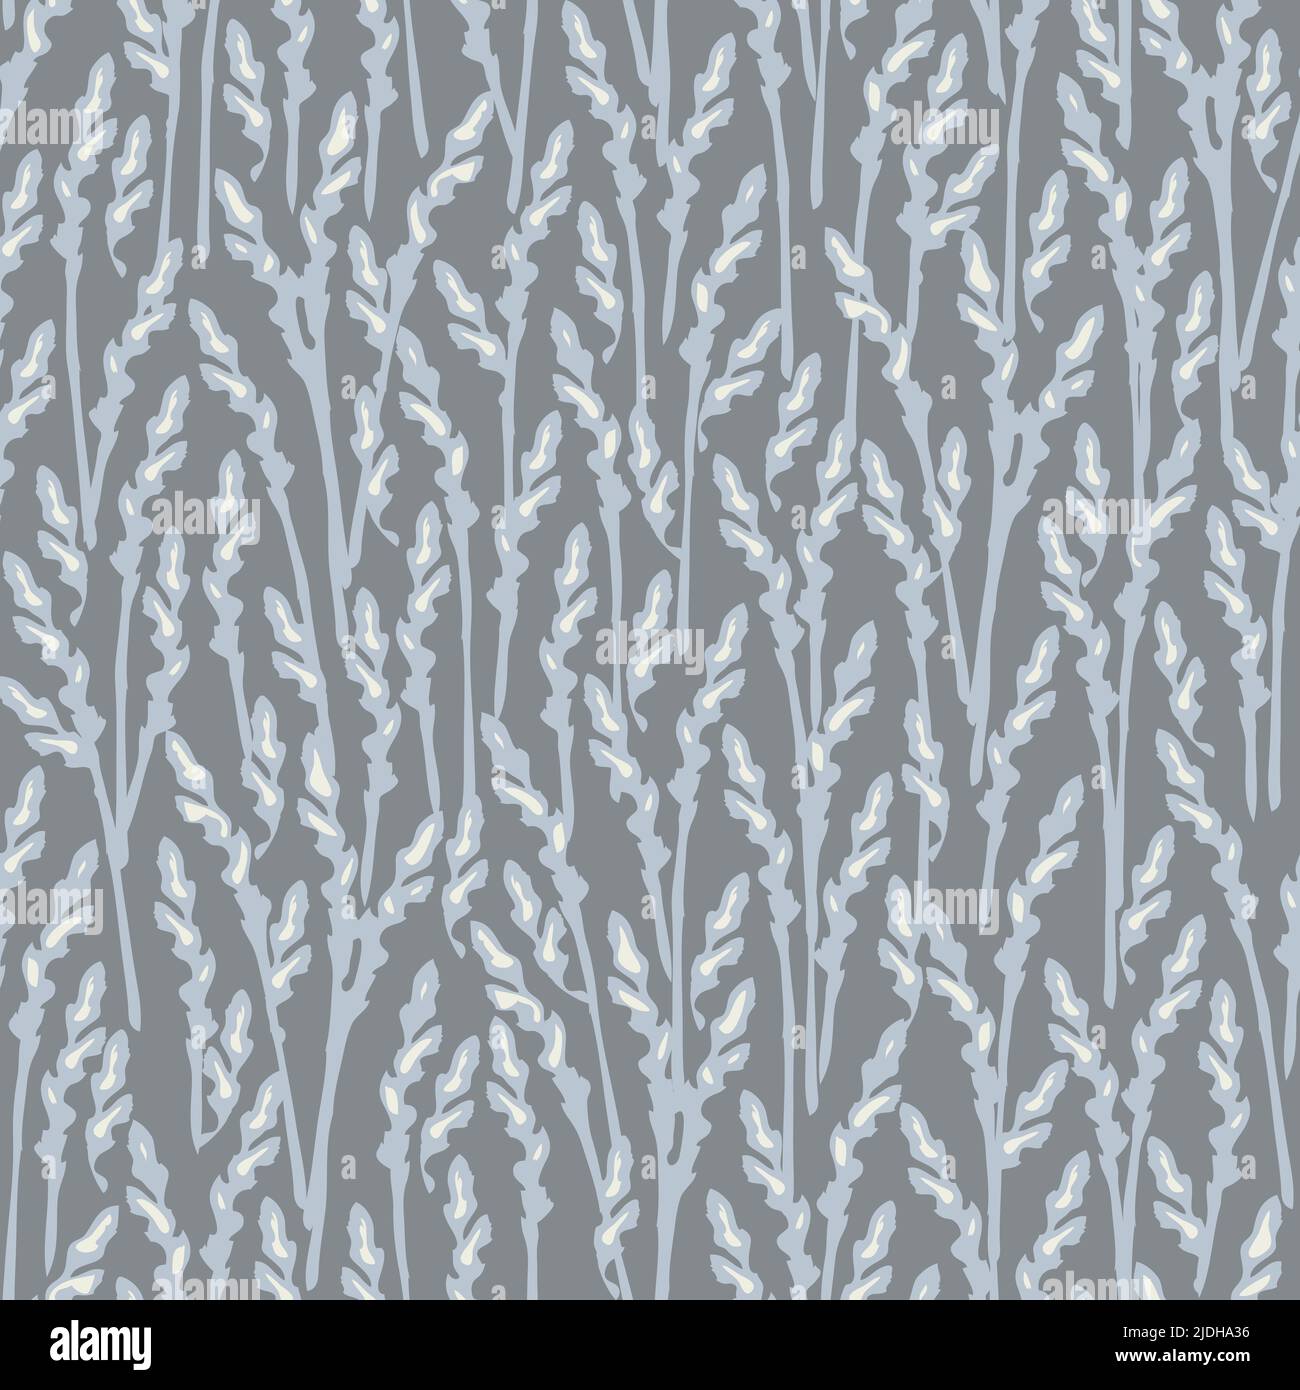 Seamless vector pattern with rye meadow texture on grey background. Decorative grass field wallpaper design. Home decor fashion textile. Stock Vector